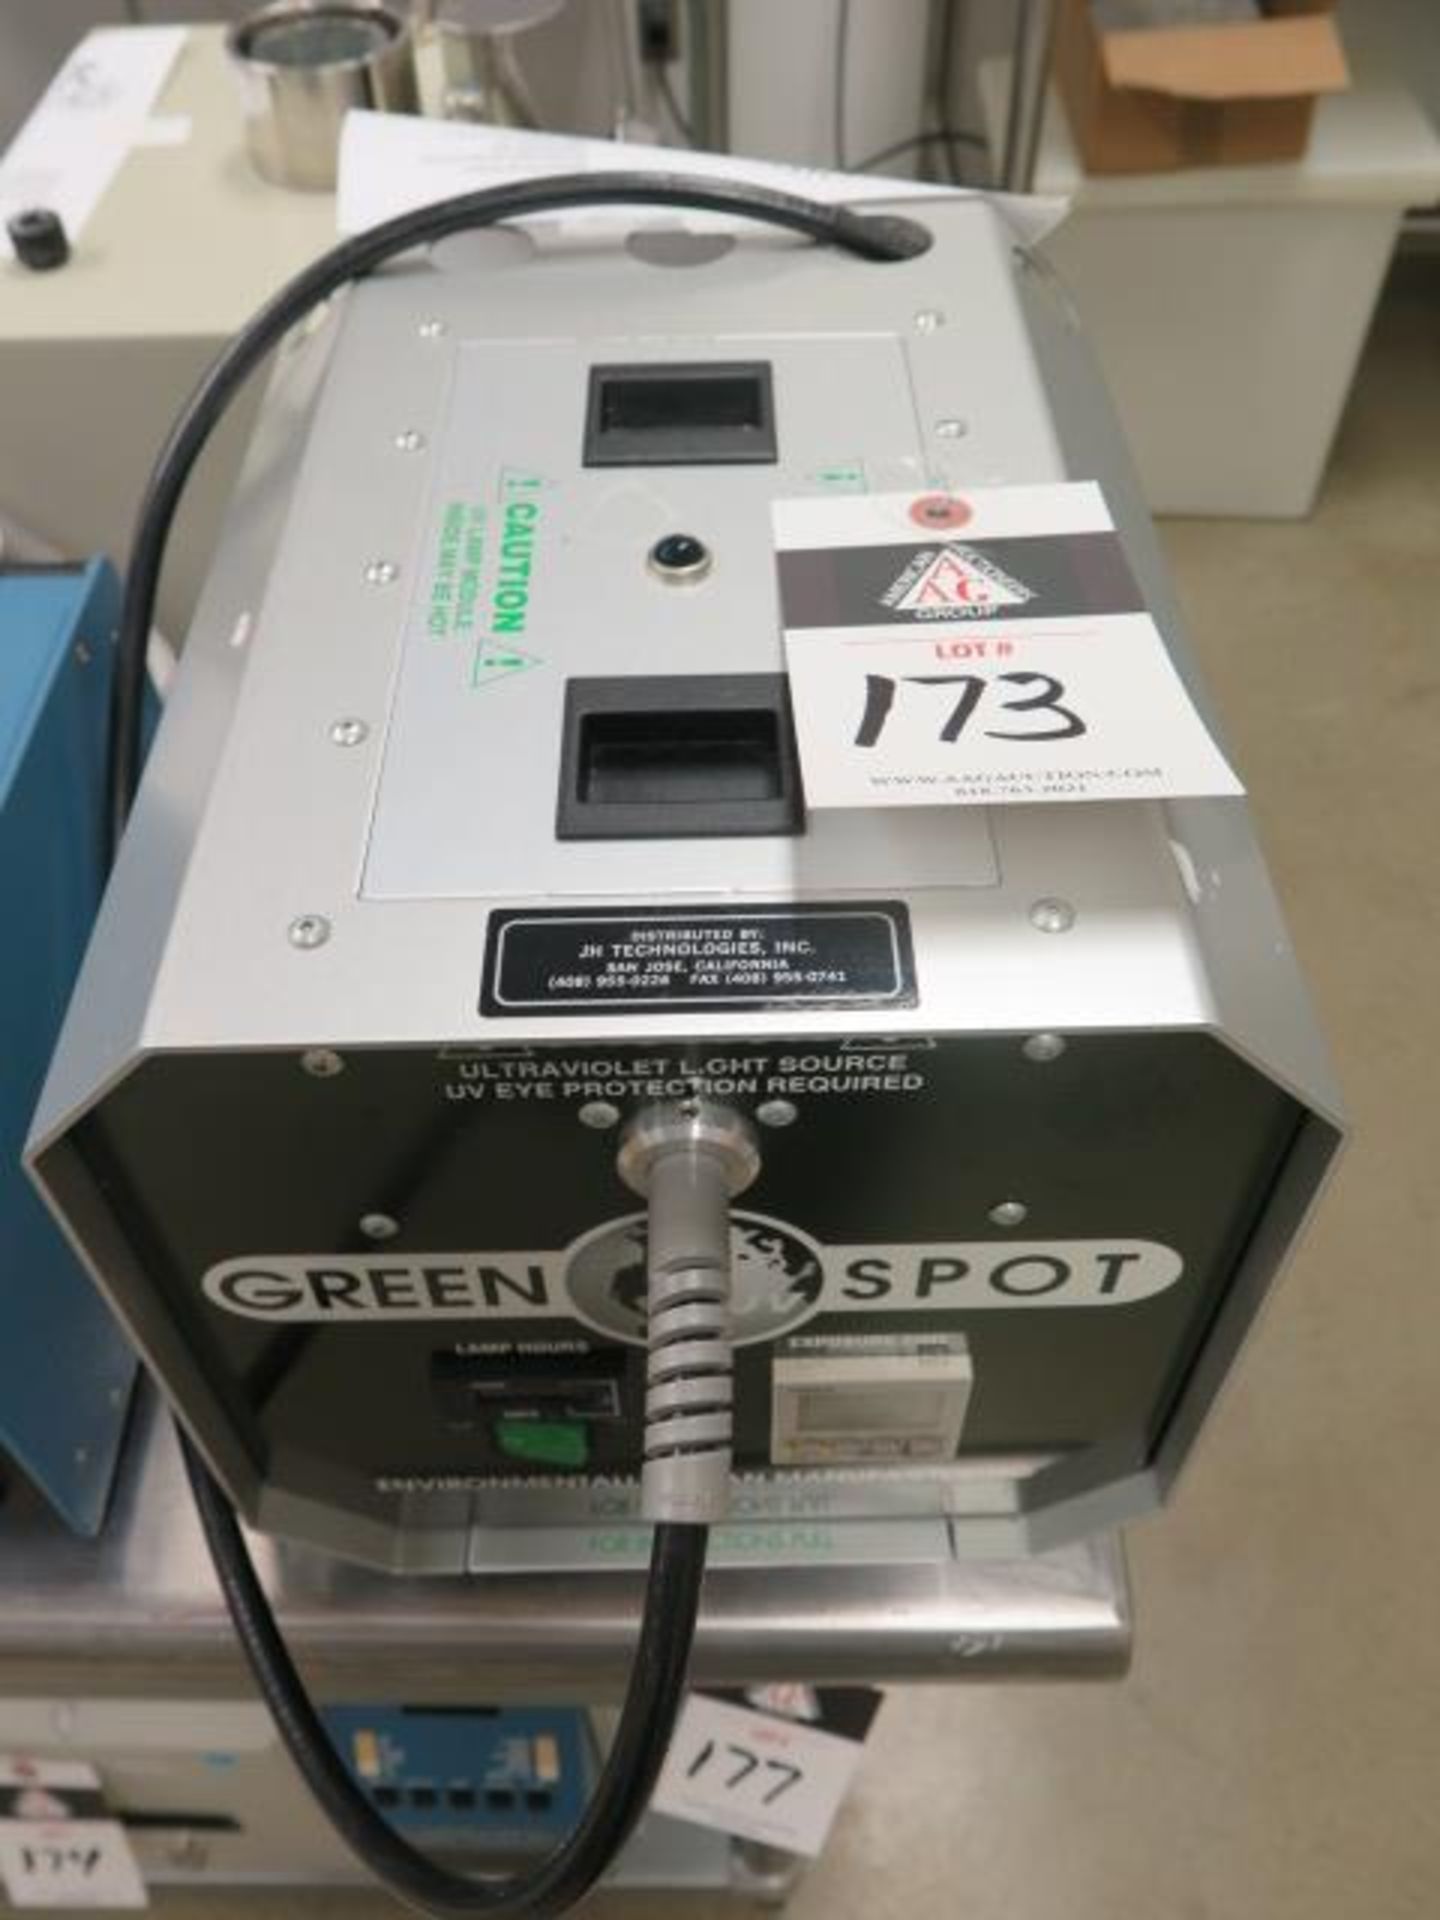 UV Source “Green Spot” mdl. 103 UV Spot Curing System (SOLD AS-IS - NO WARRANTY)